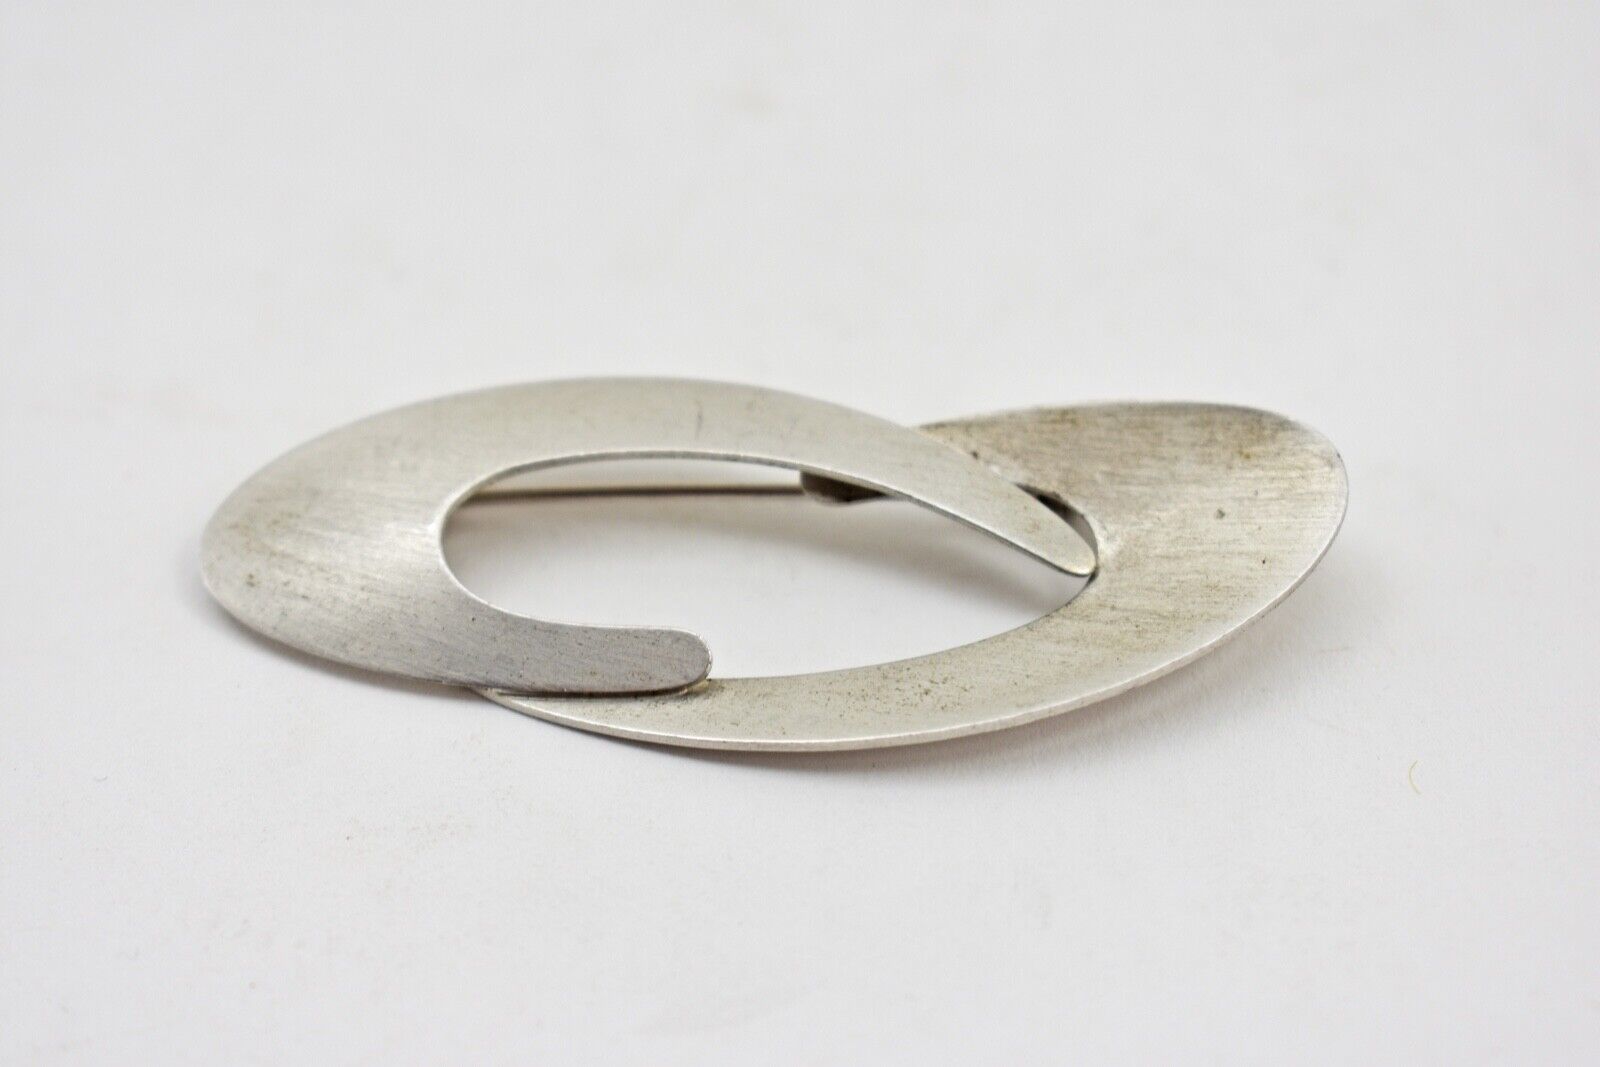 Primary image for Vintage Brushed Sterling Silver Brooch Modernist Atomic Age Pin Jewelry by Beau